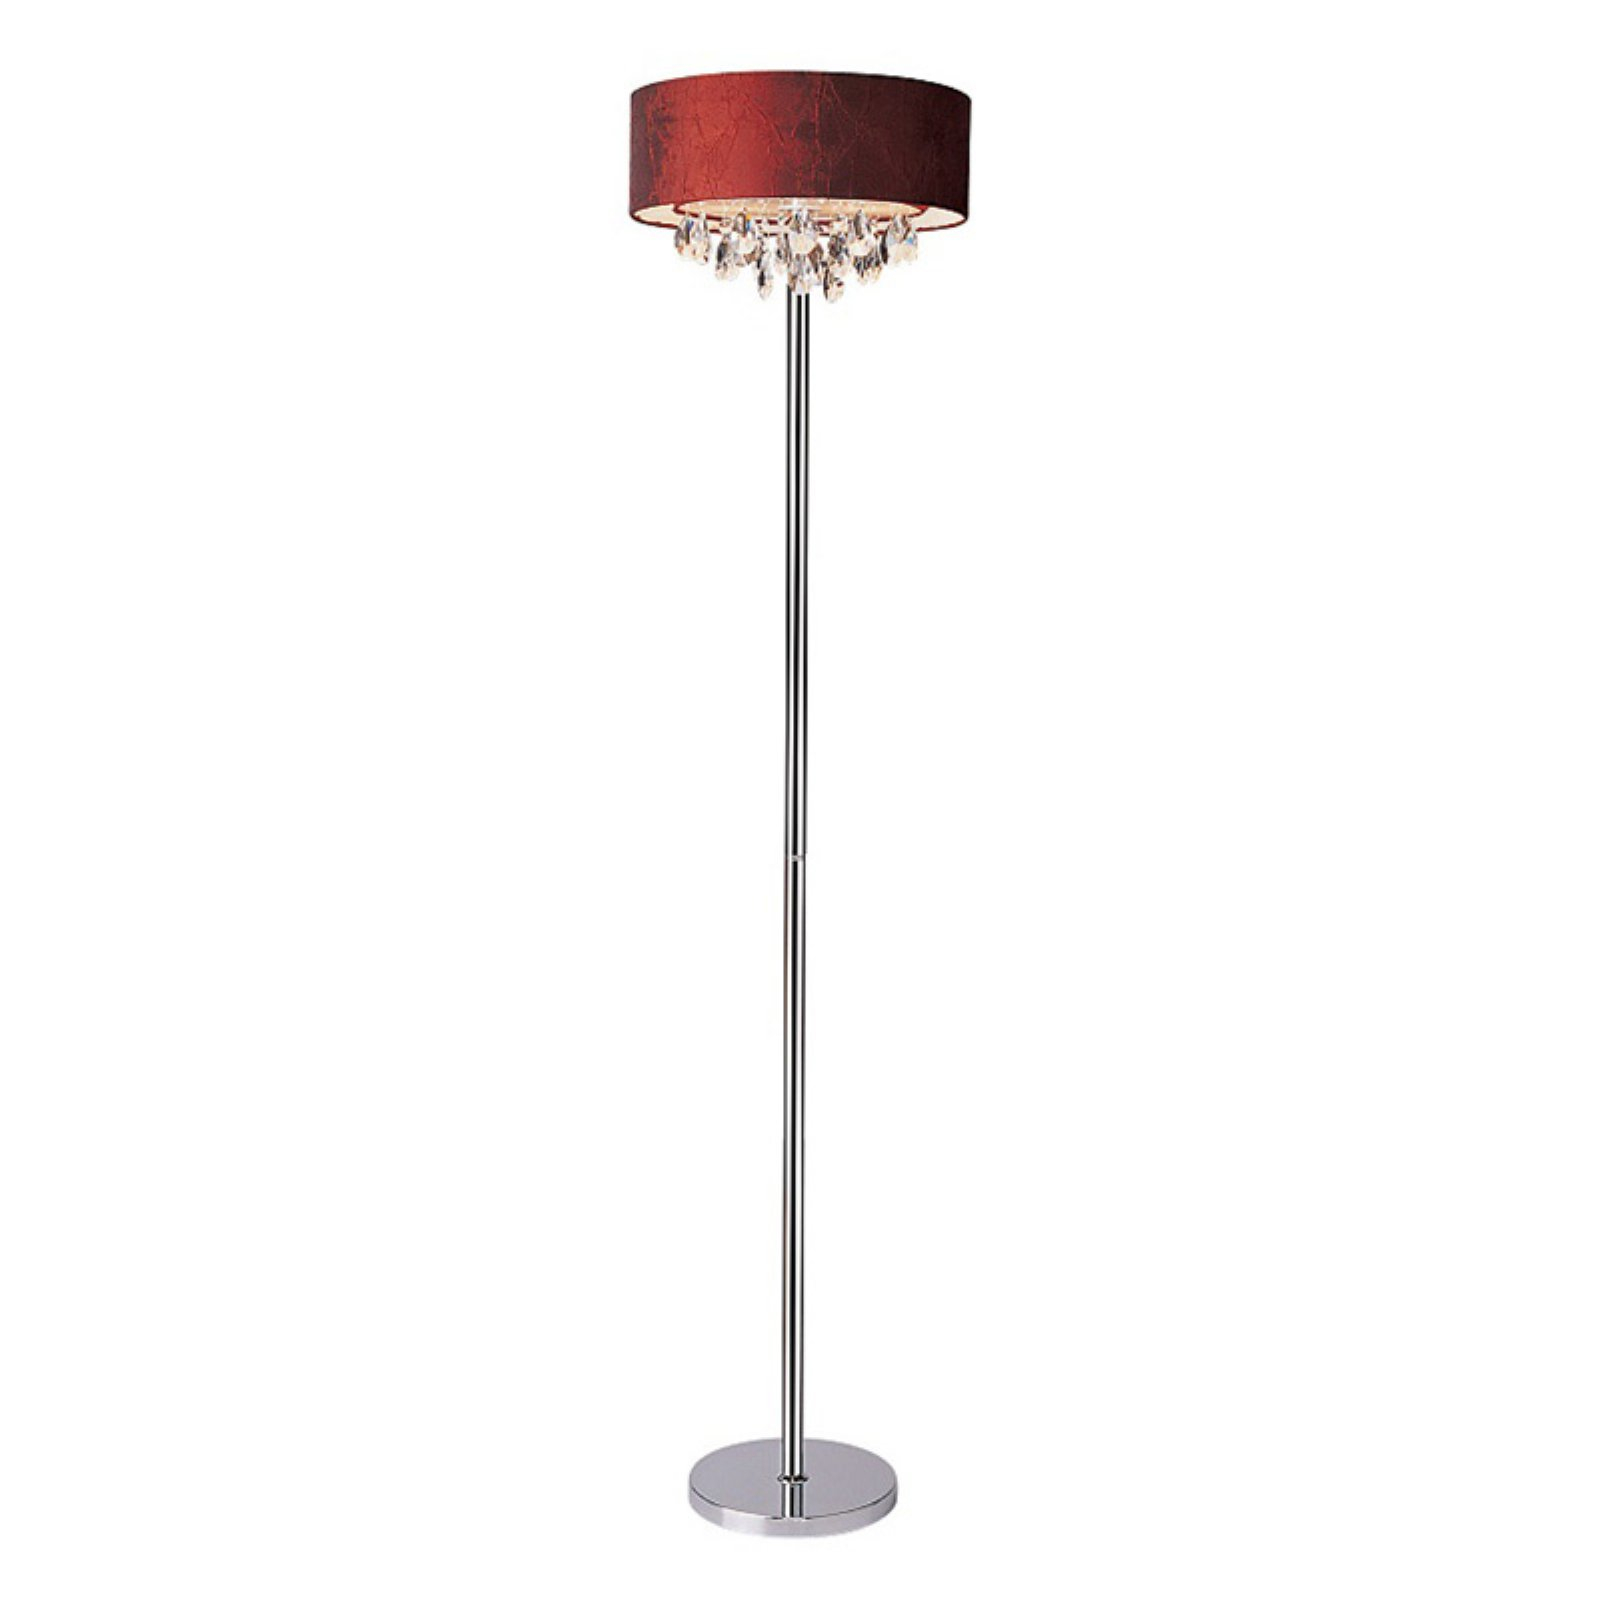 Elegant Designs Floor Lamp 65h In Red Shade Products for dimensions 1600 X 1600